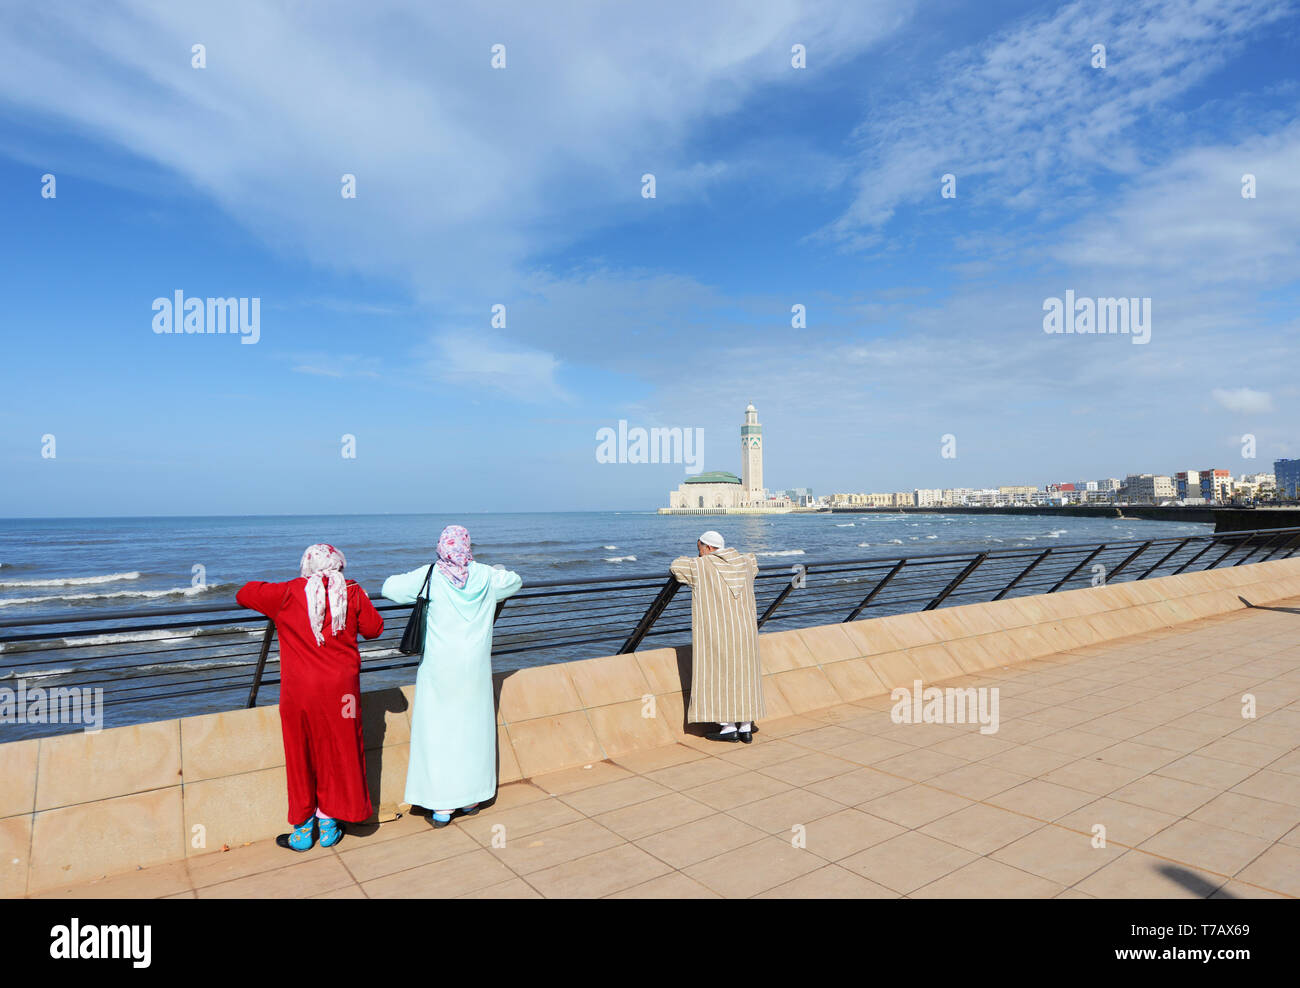 Local Moroccans enjoying the view of the Hassan II mosque in Casablanca. Stock Photo